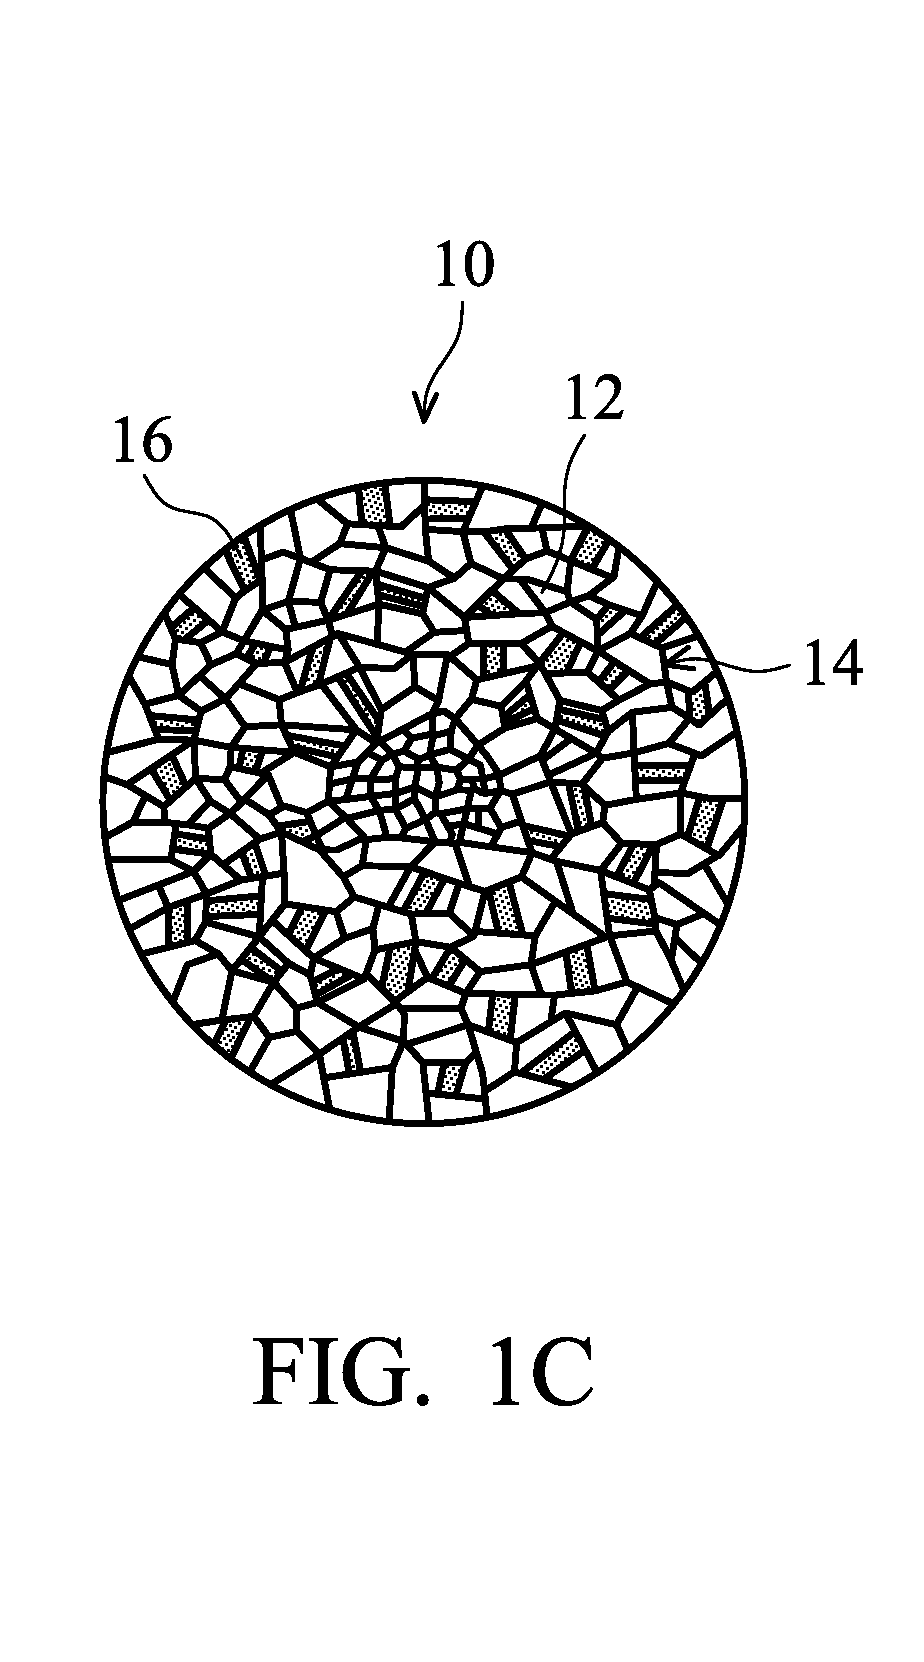 Alloy wire and methods for manufacturing the same